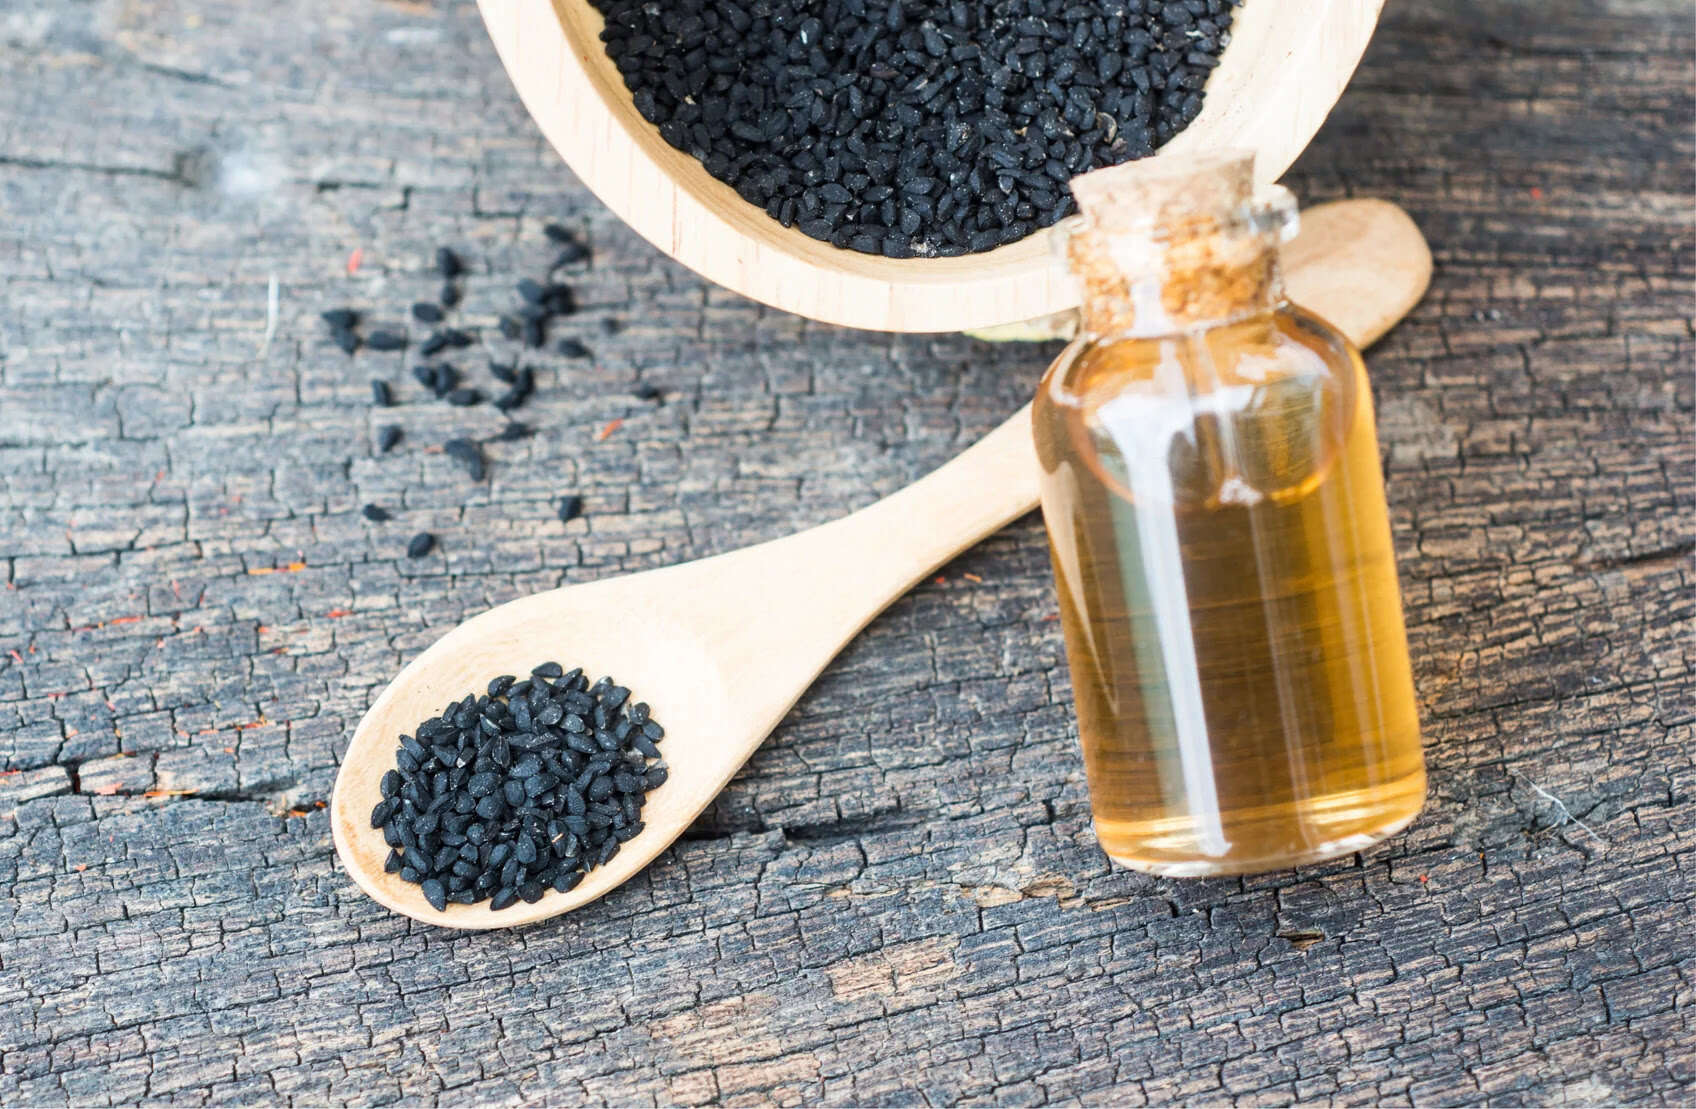 How To Use Black Seed Oil For Skin